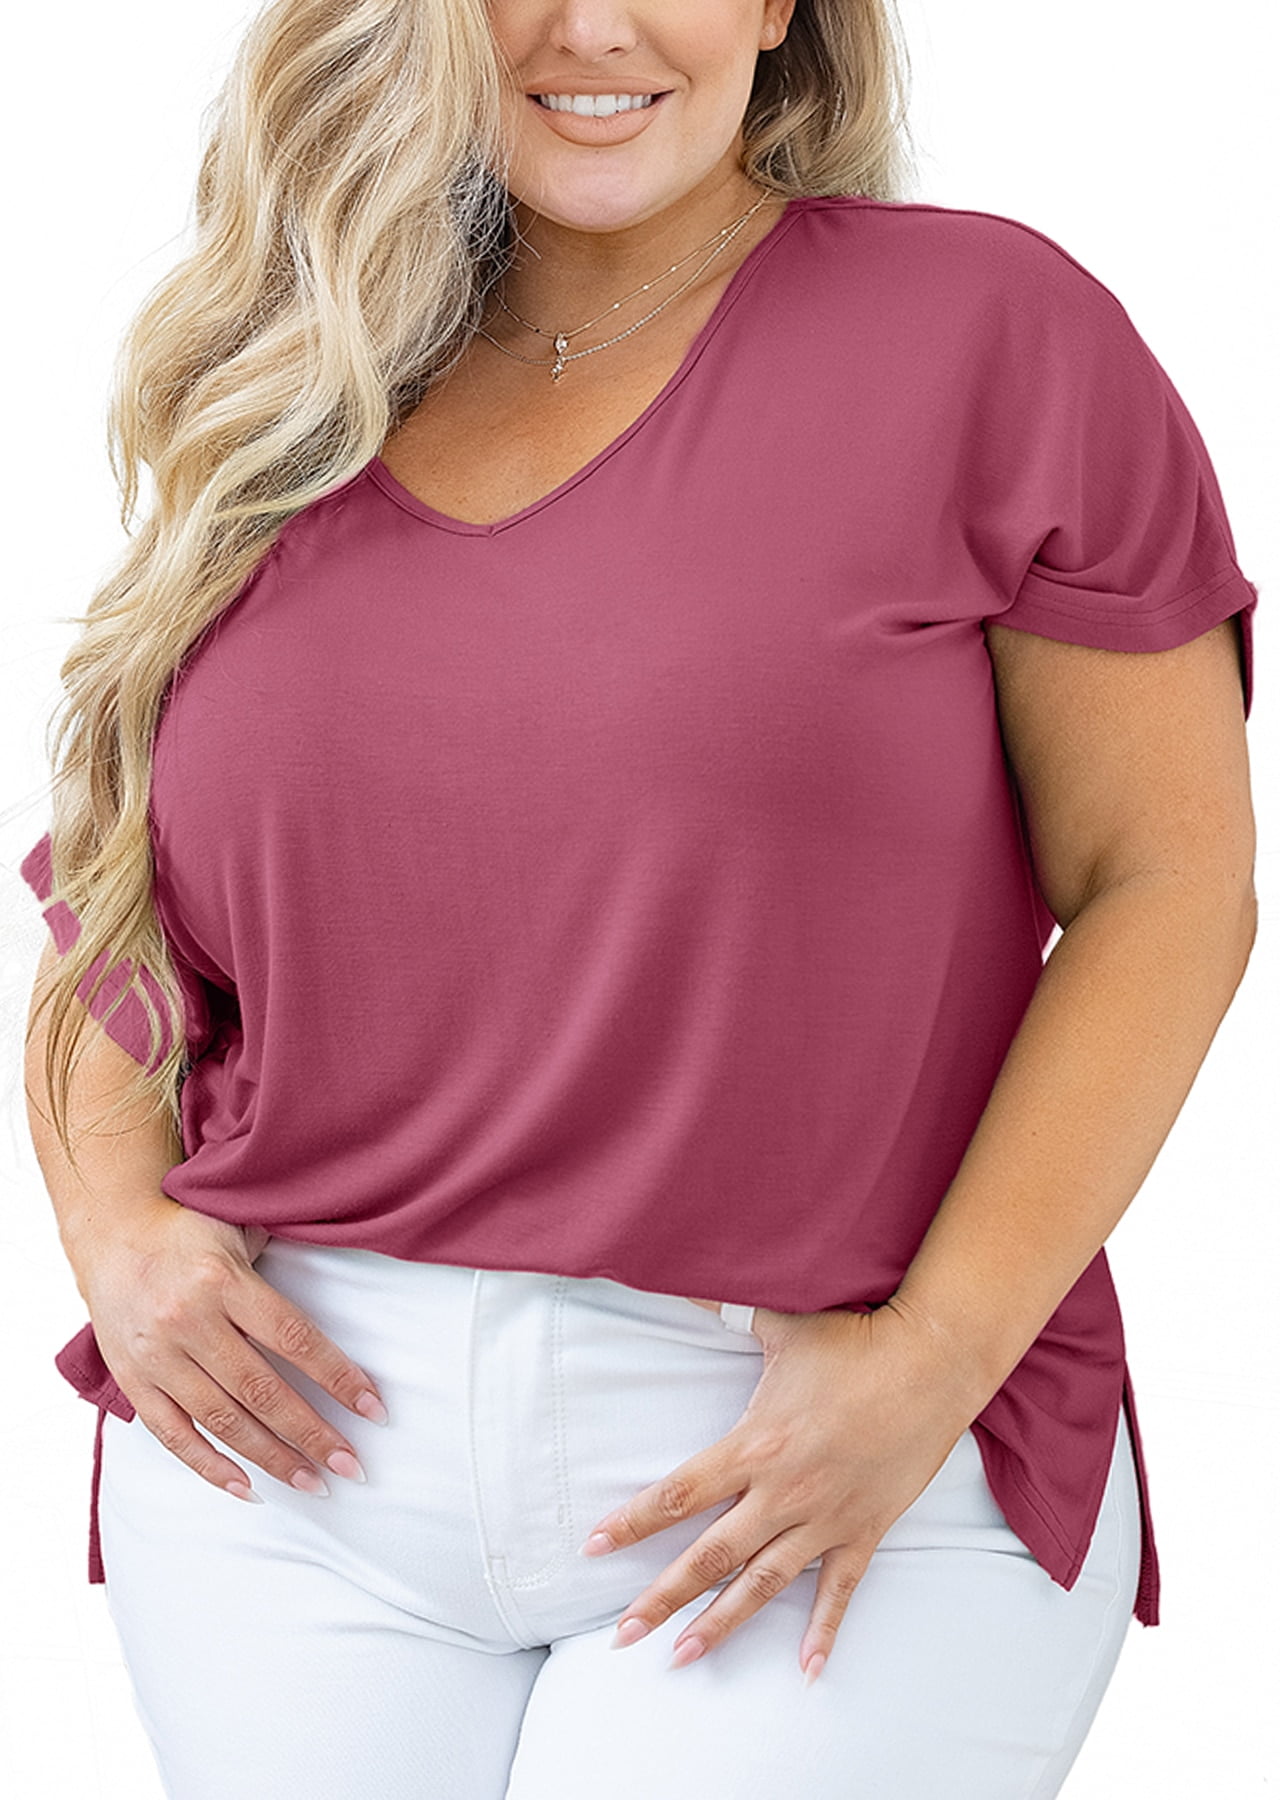 SHOWMALL Women Plus Size Tops Short Sleeve Tunic Side Slit Shirt Summer  V-Neck Blouse Army Green 2X Tops 